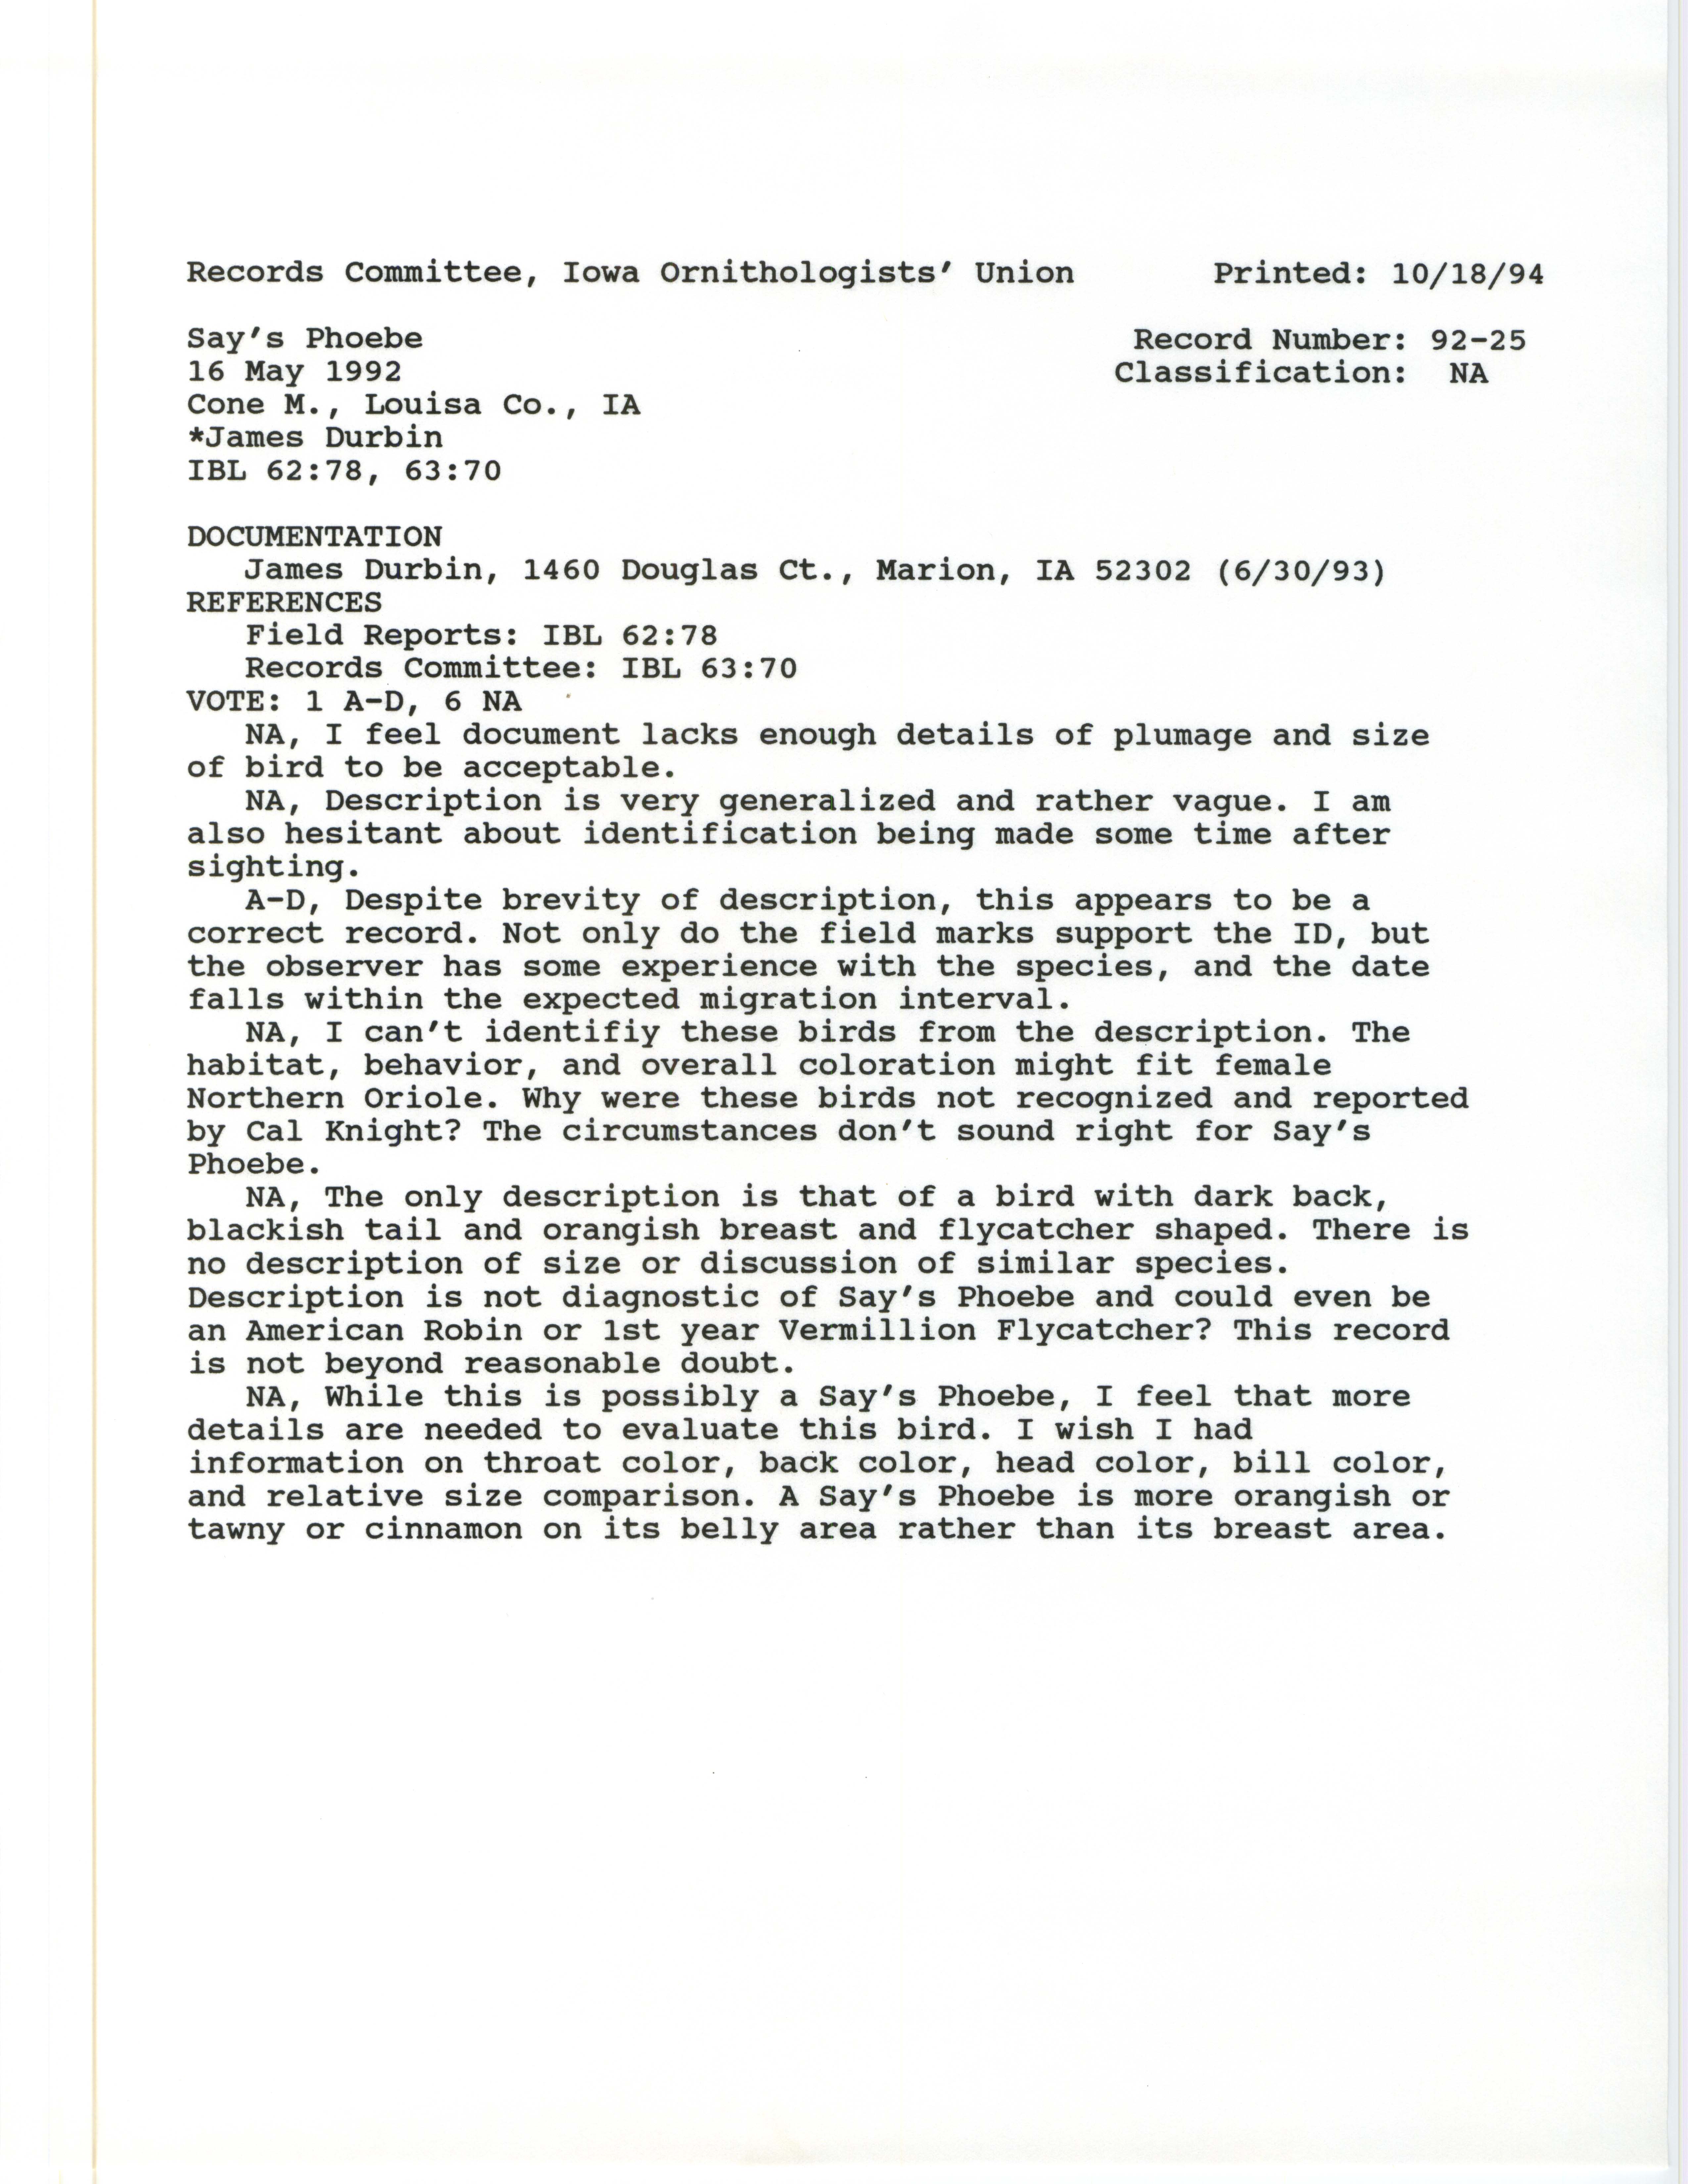 Records Committee review for rare bird sighting for Say's Phoebe at Cone Marsh, 1992